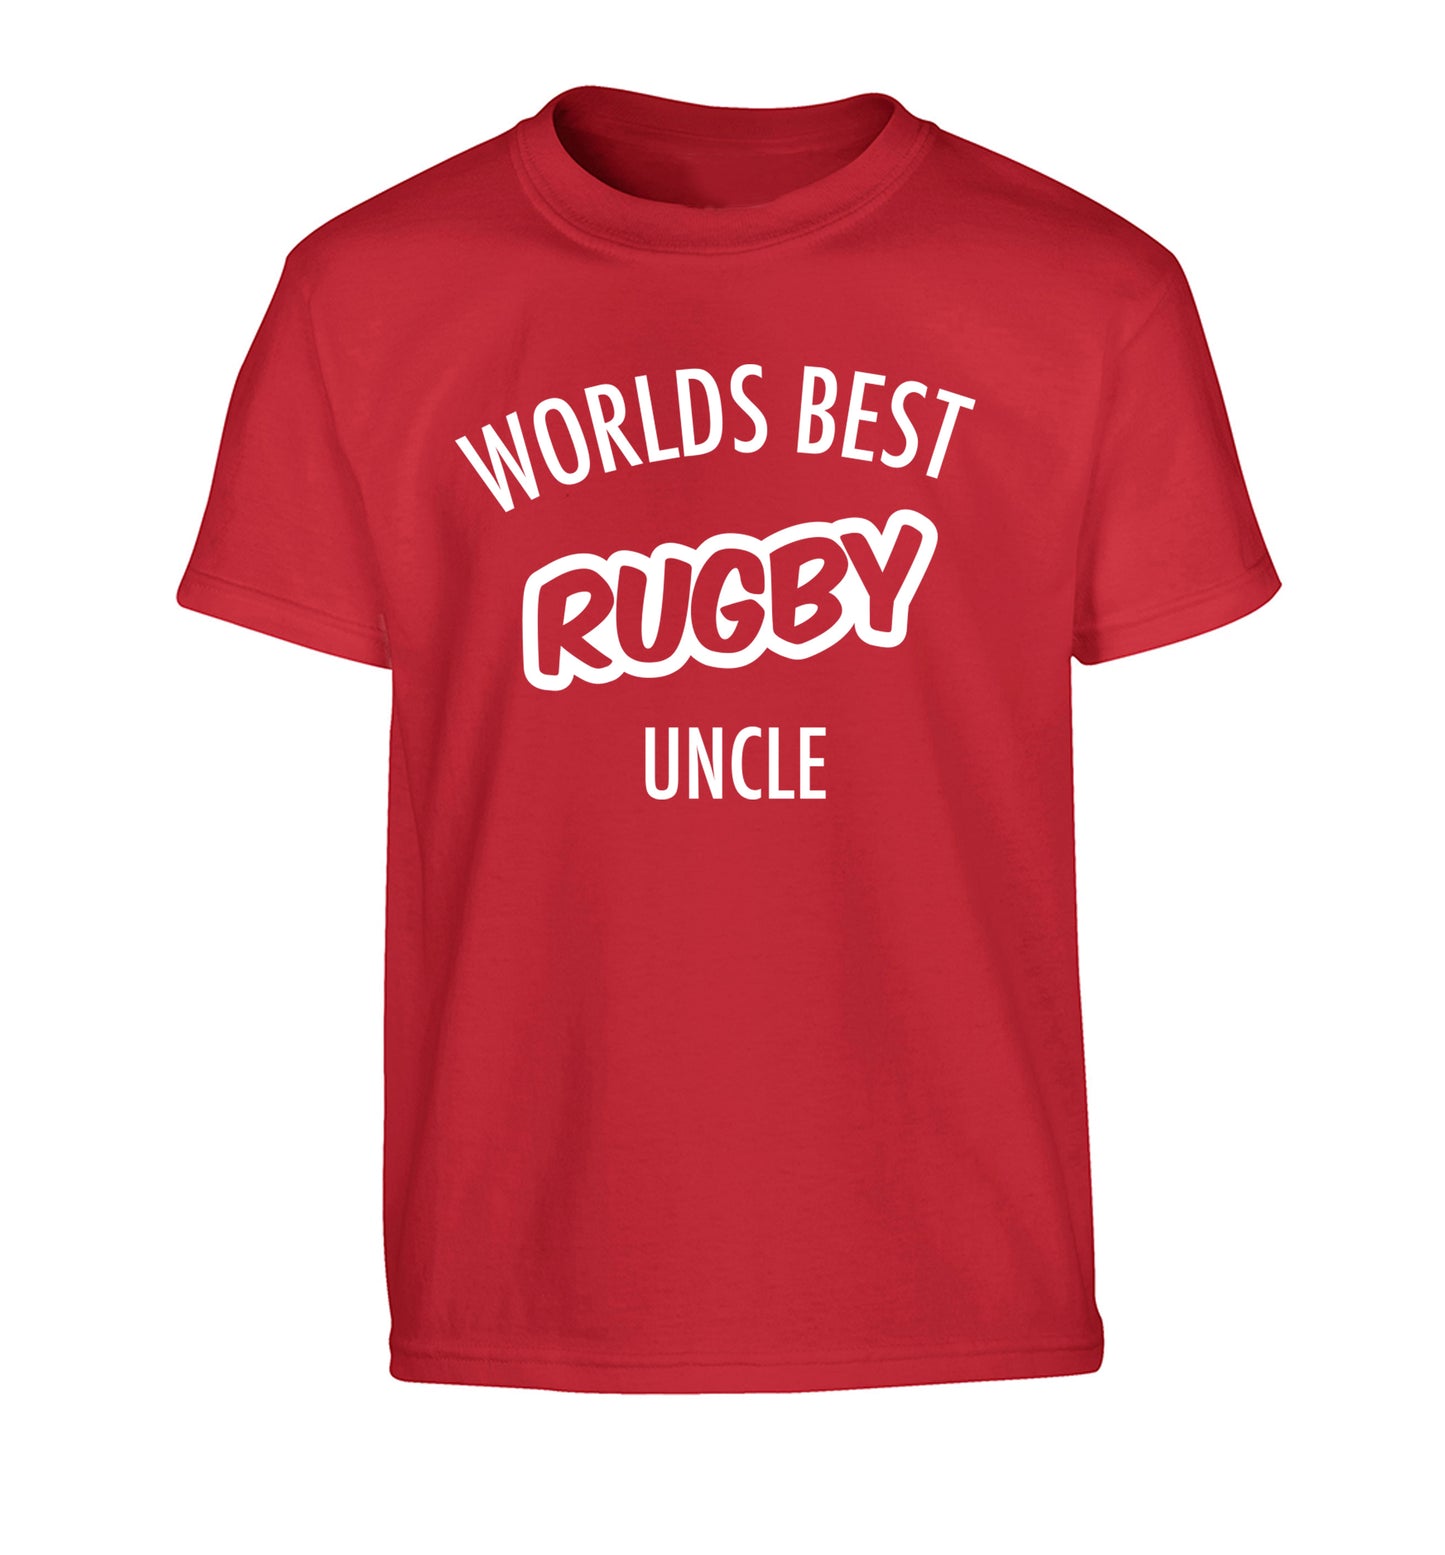 Worlds best rugby uncle Children's red Tshirt 12-13 Years